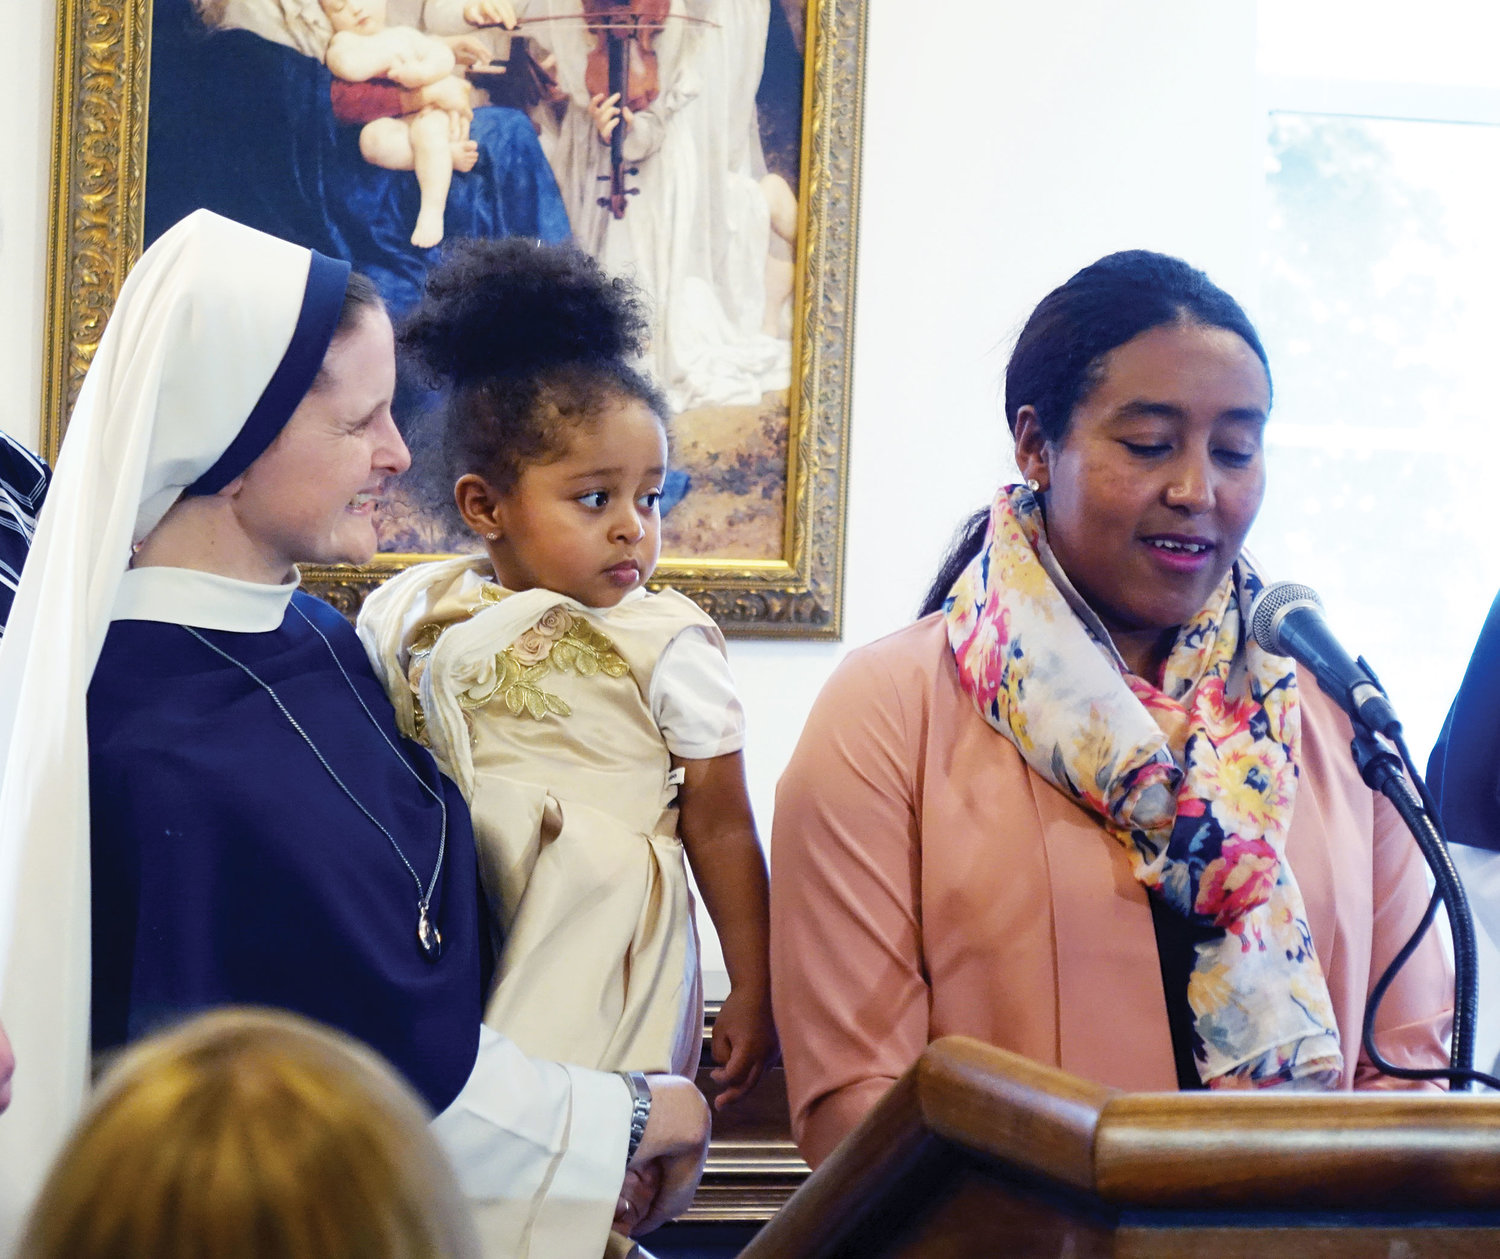 MOM’S BIGGEST FAN—Sister Maeve Nativitas, S.V., holds young Sena Love, as her mother, Brhane, speaks during a Feb. 18 press conference in which Cardinal Dolan and others confirmed the archdiocese’s commitment to helping pregnant mothers in need.